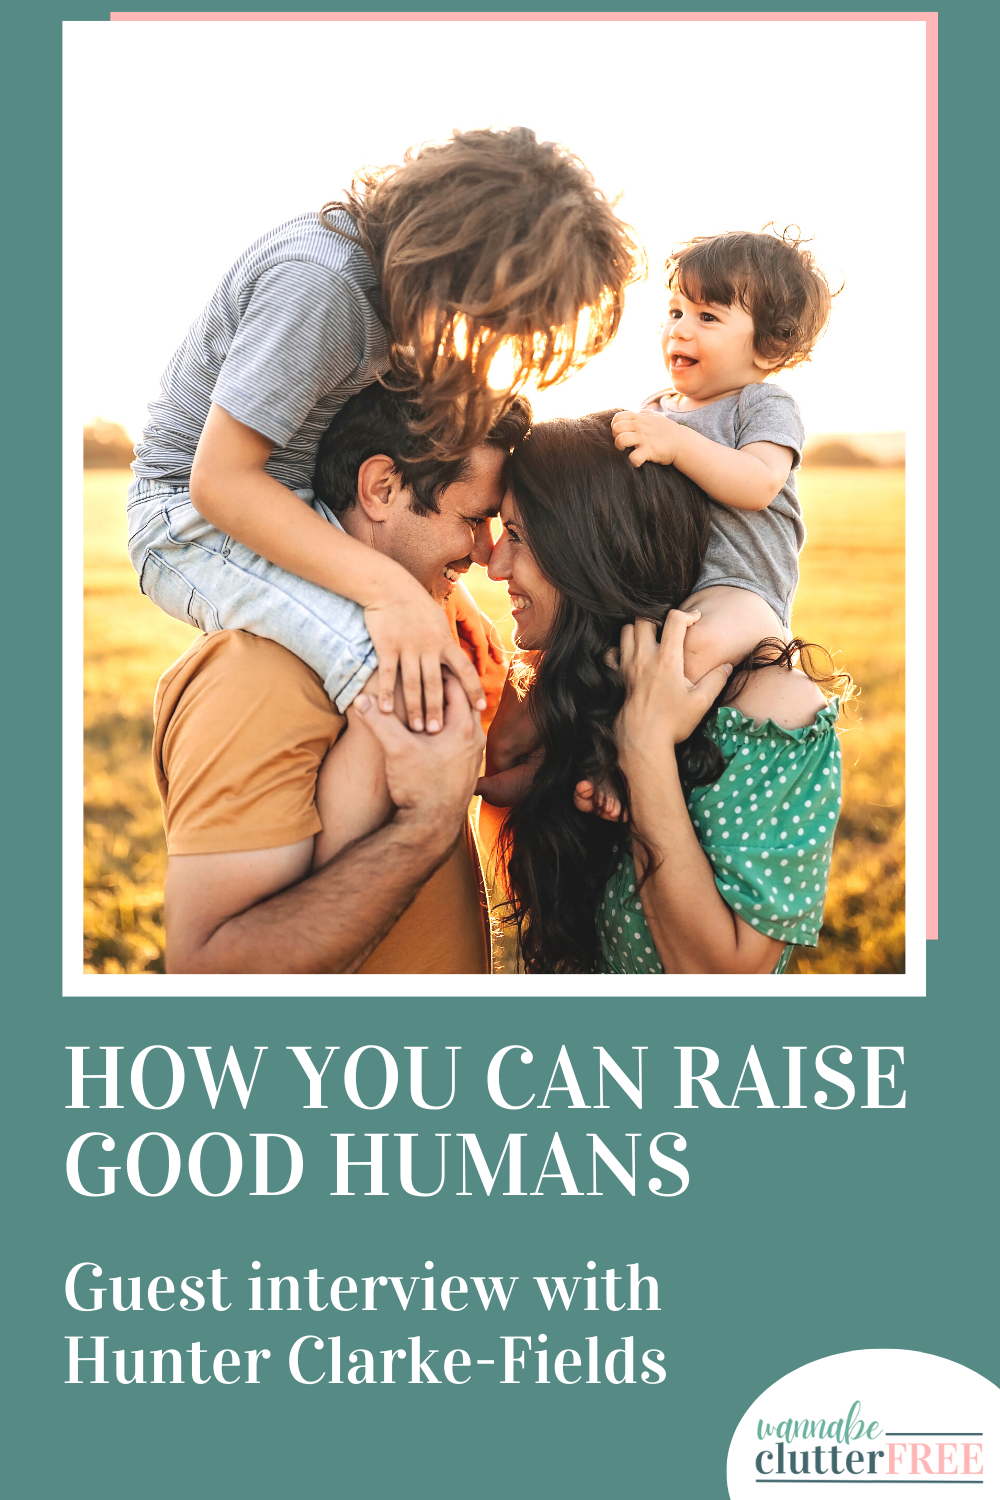 How you can raise good humans